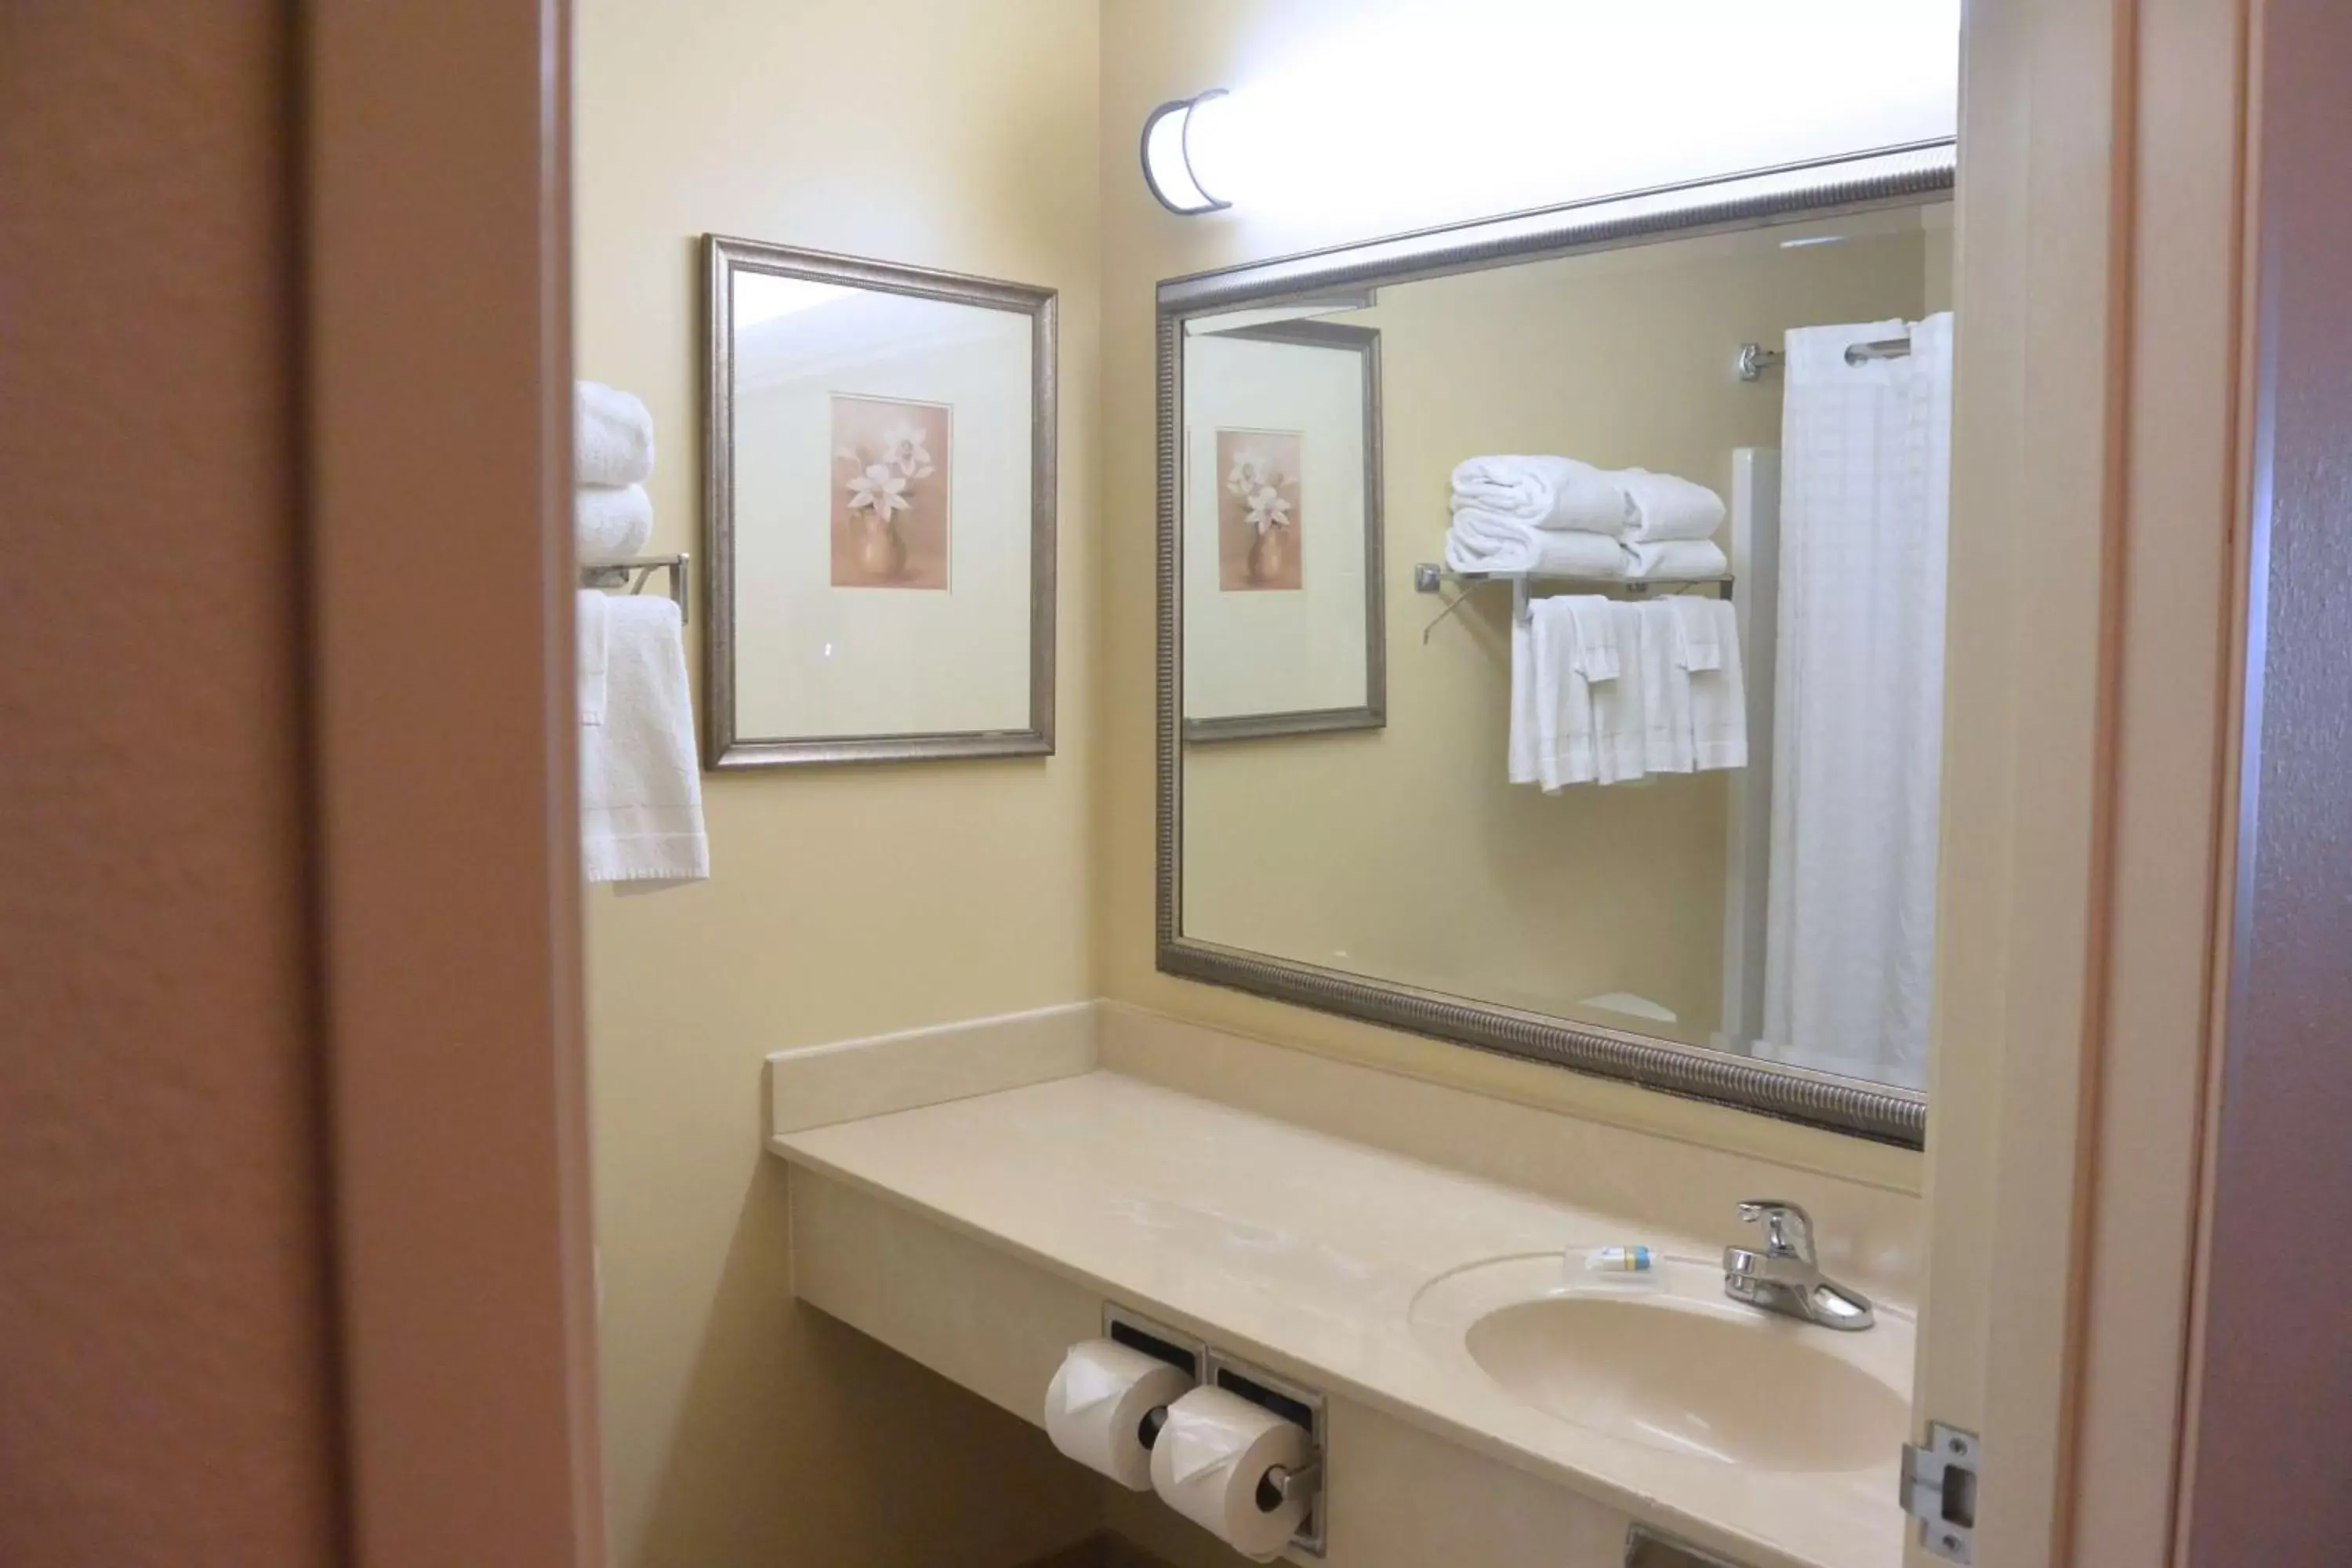 Bathroom in Country Inn & Suites by Radisson, Peoria North, IL